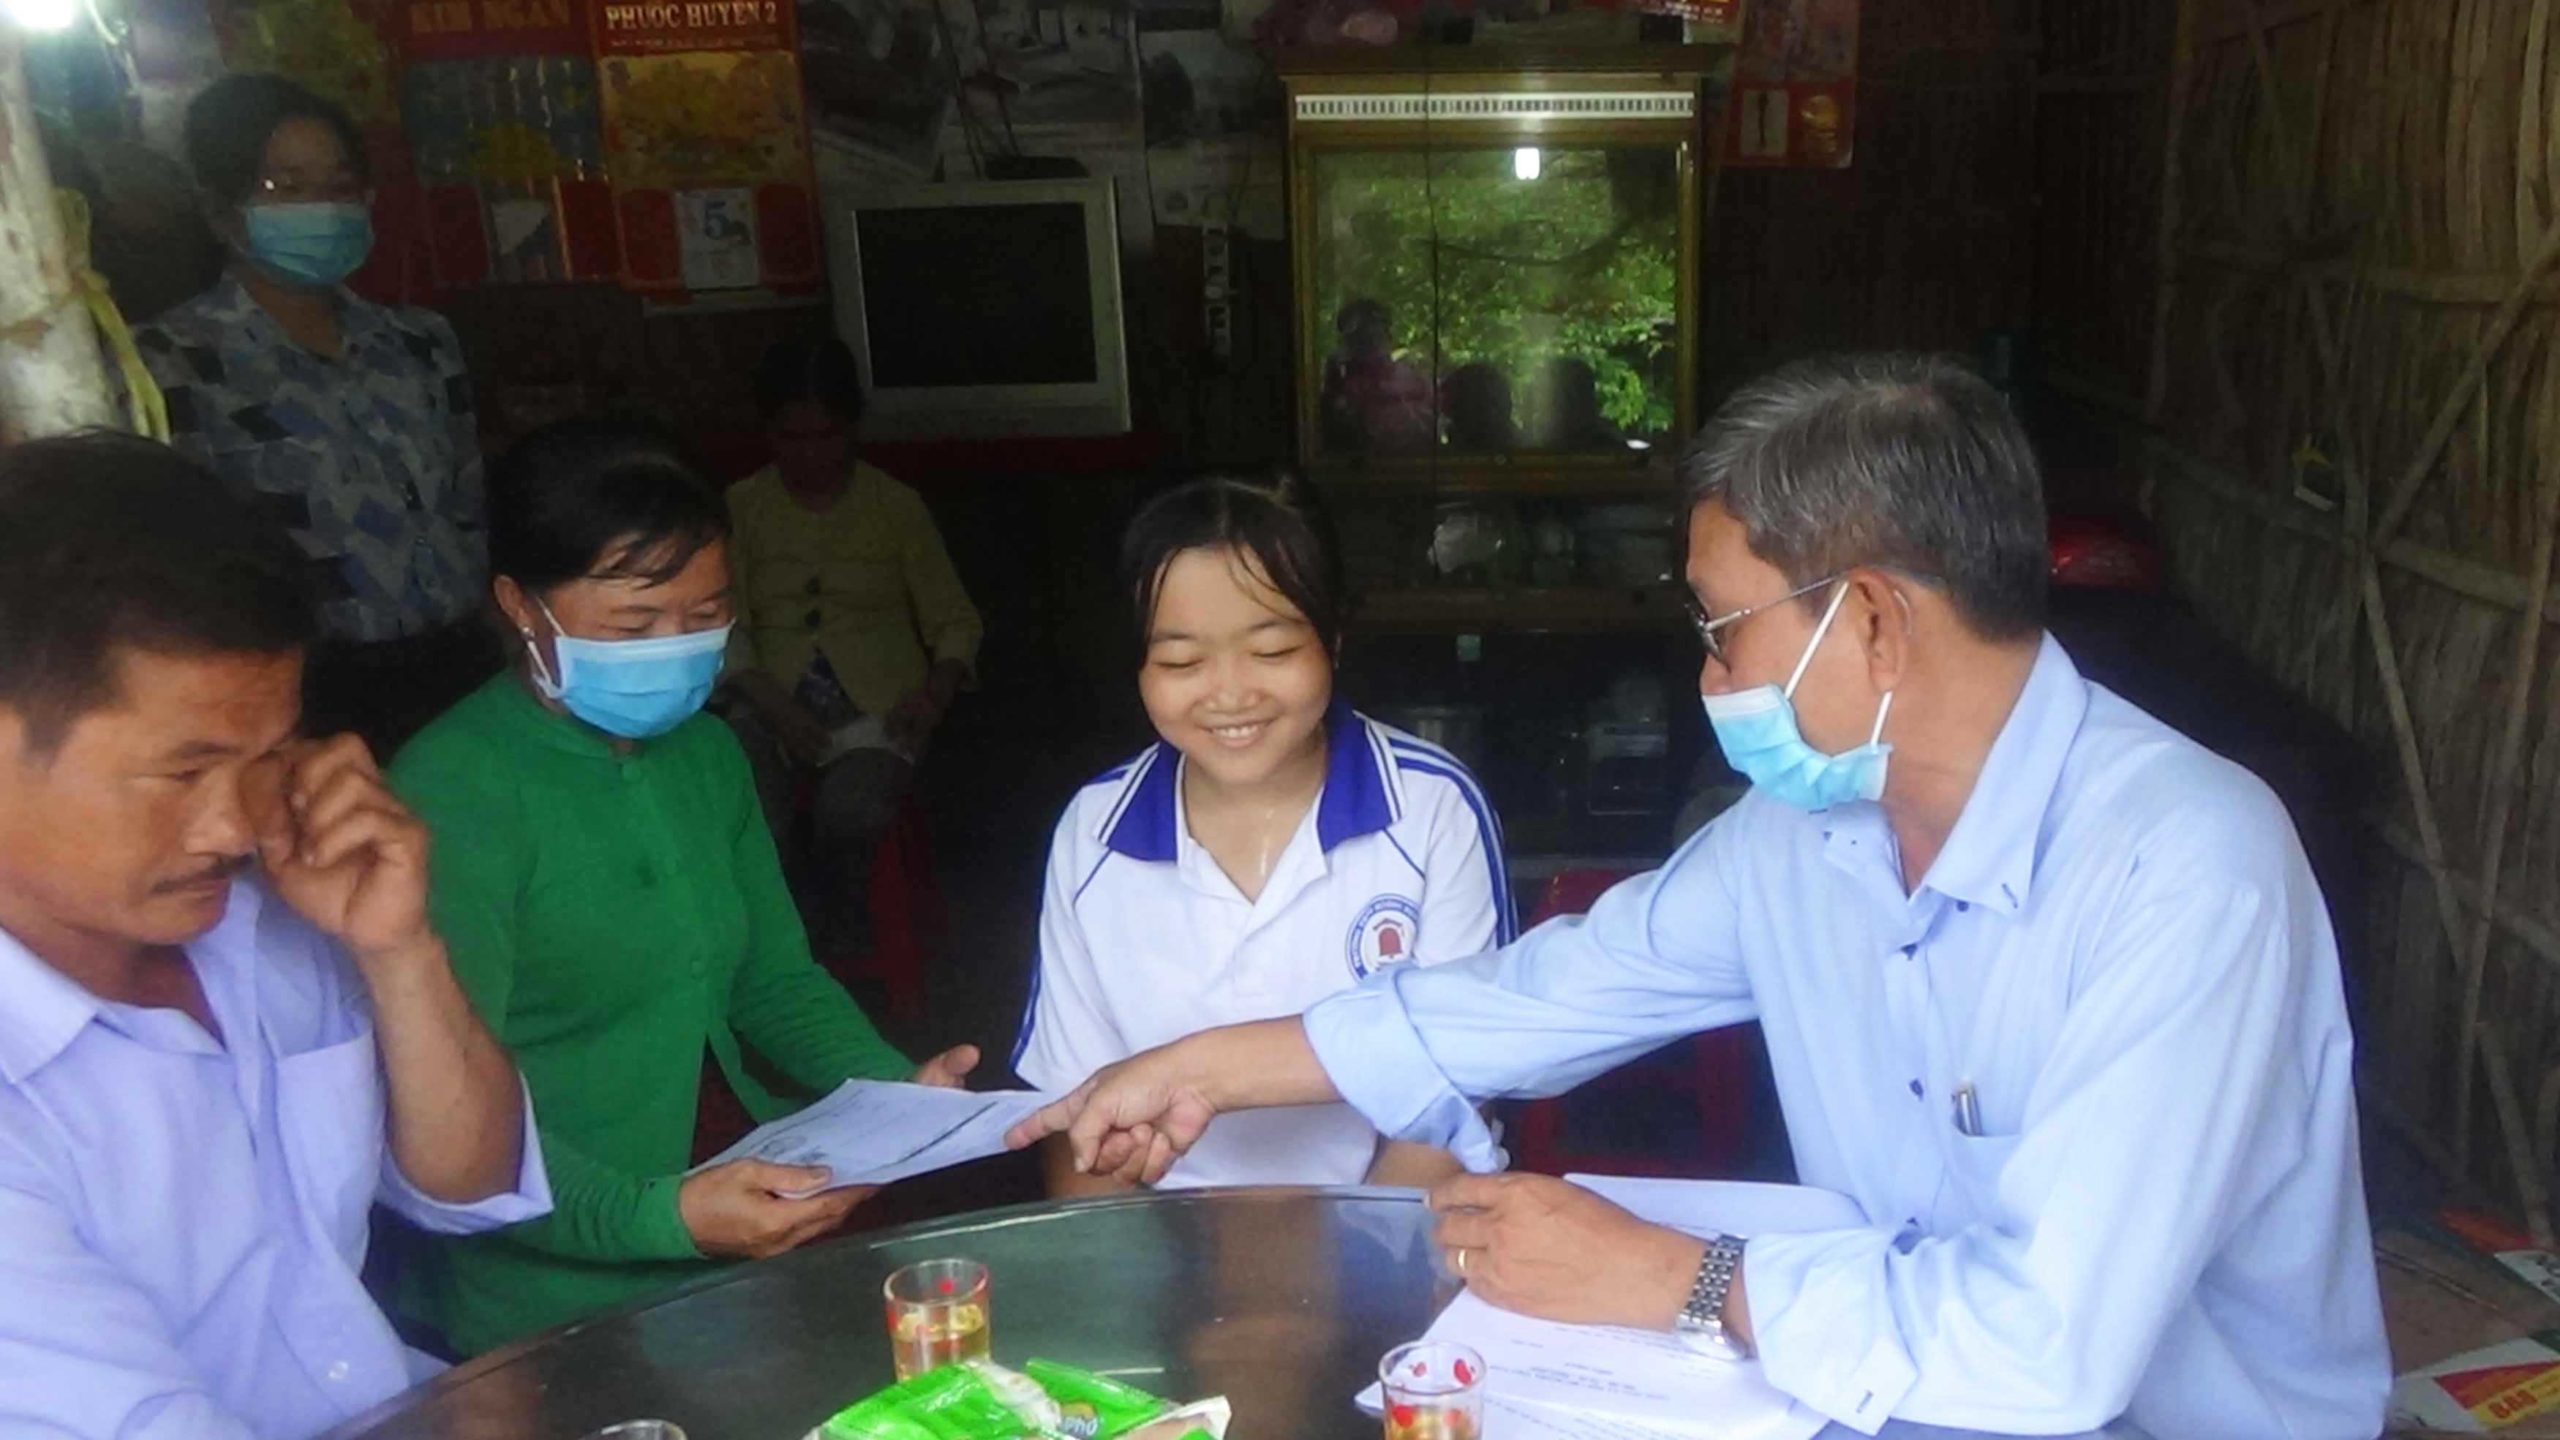 Sponsored child Tran receiving a generous gift from her sponsors in Vietnam